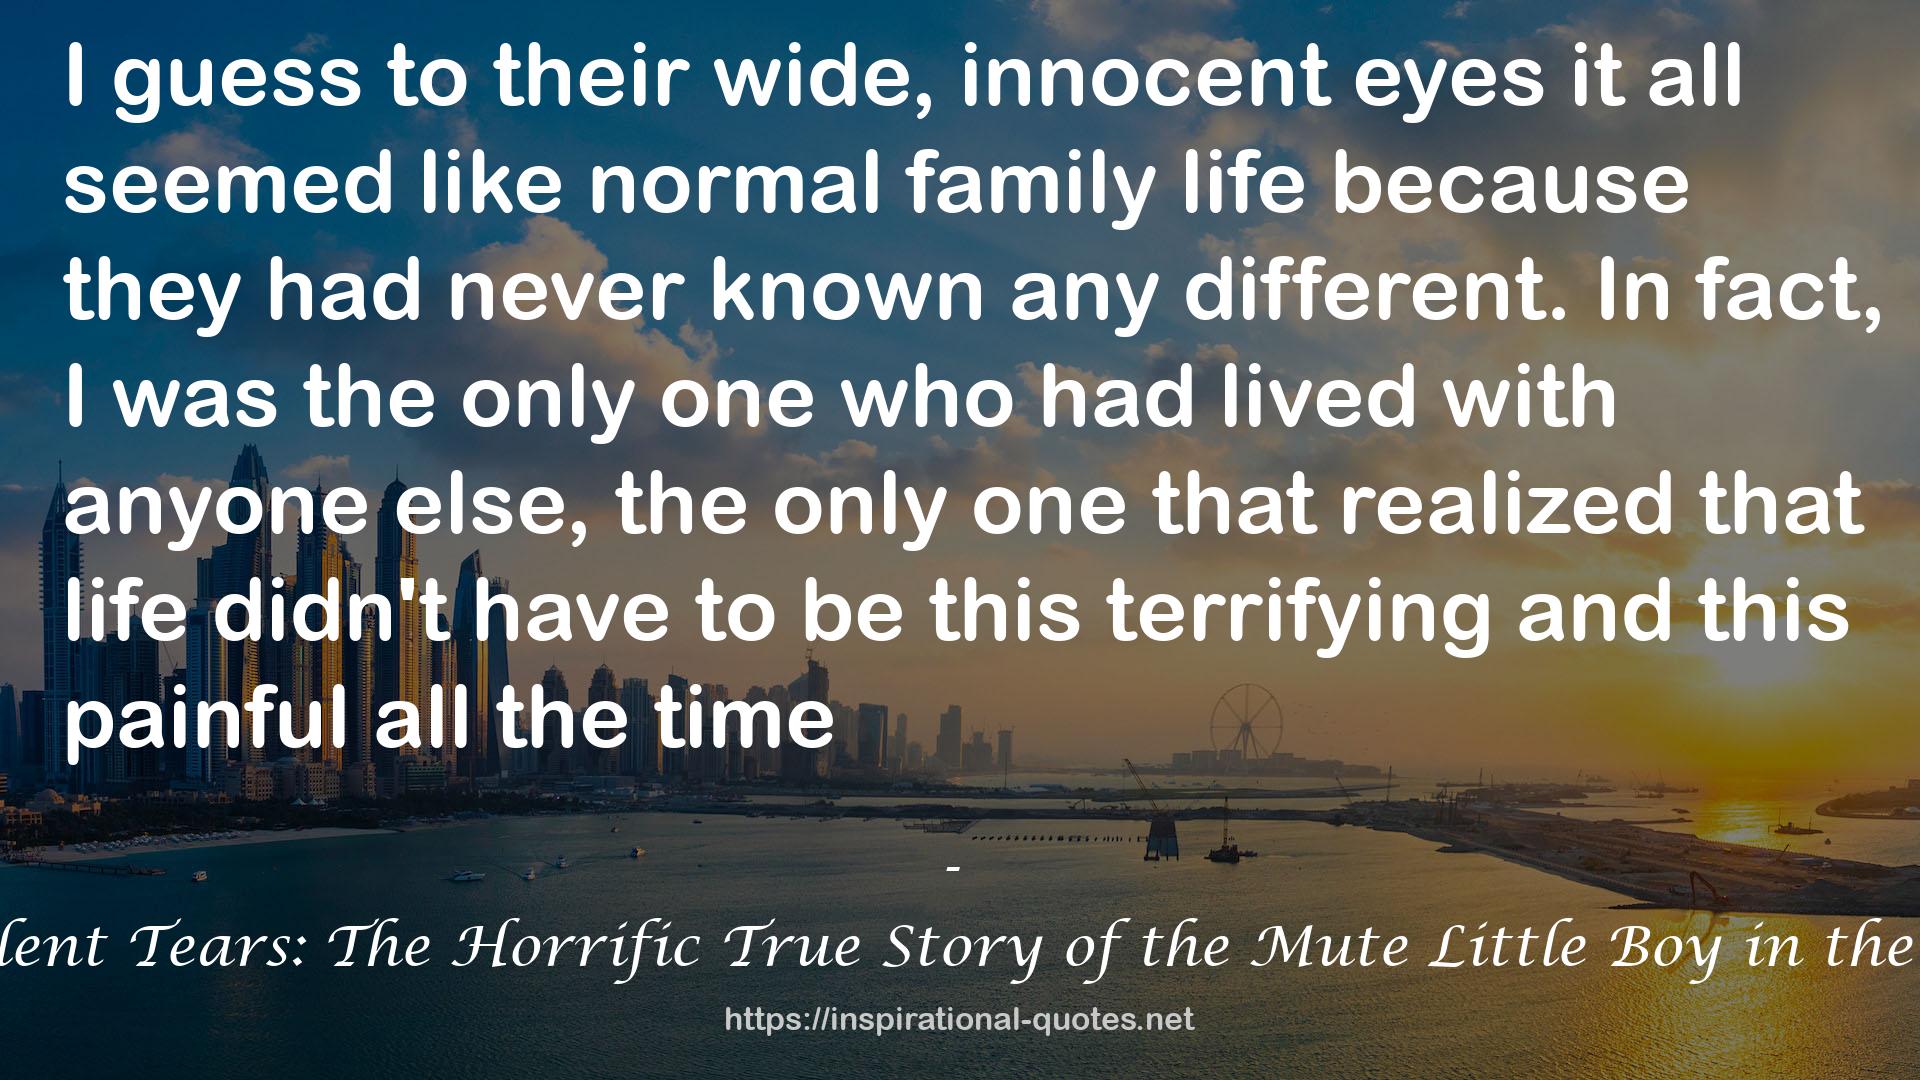 Cry Silent Tears: The Horrific True Story of the Mute Little Boy in the Cellar QUOTES